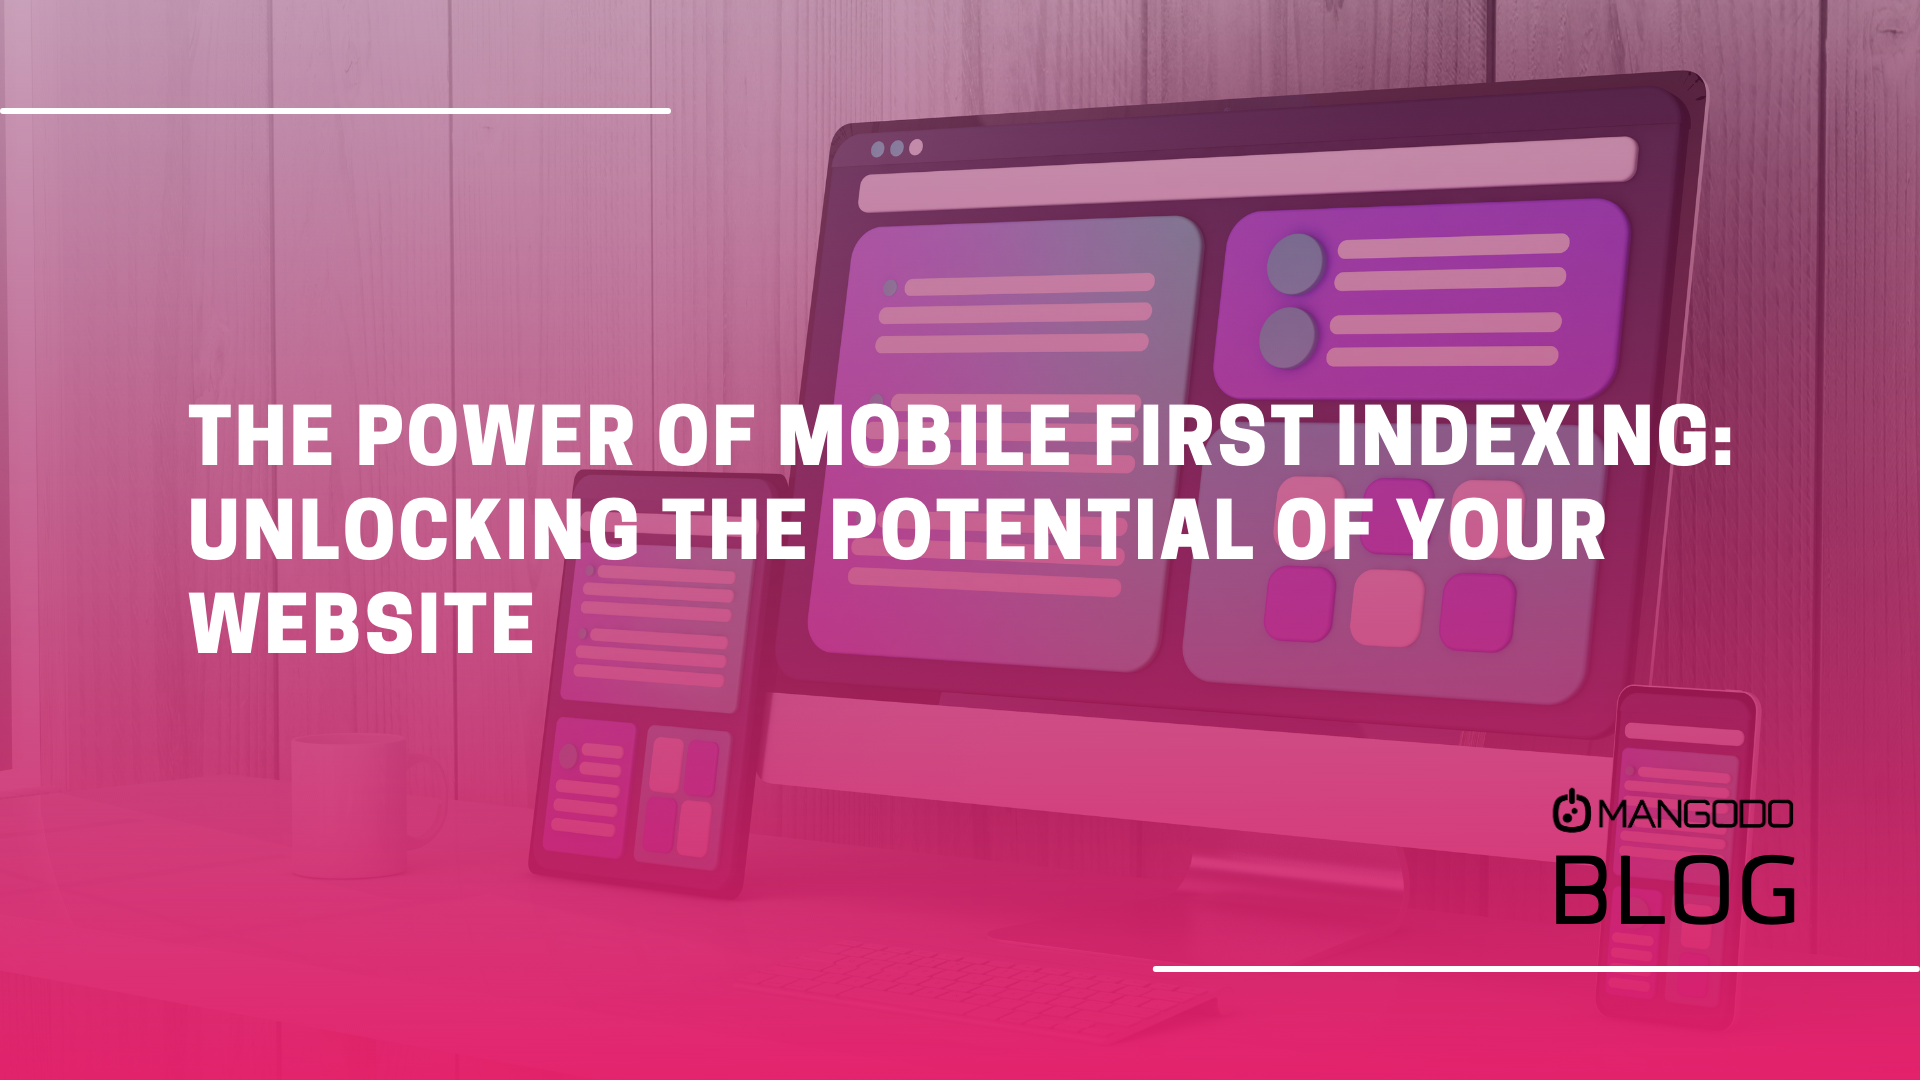 The Power of Mobile First Indexing: Unlocking the Potential of Your Website